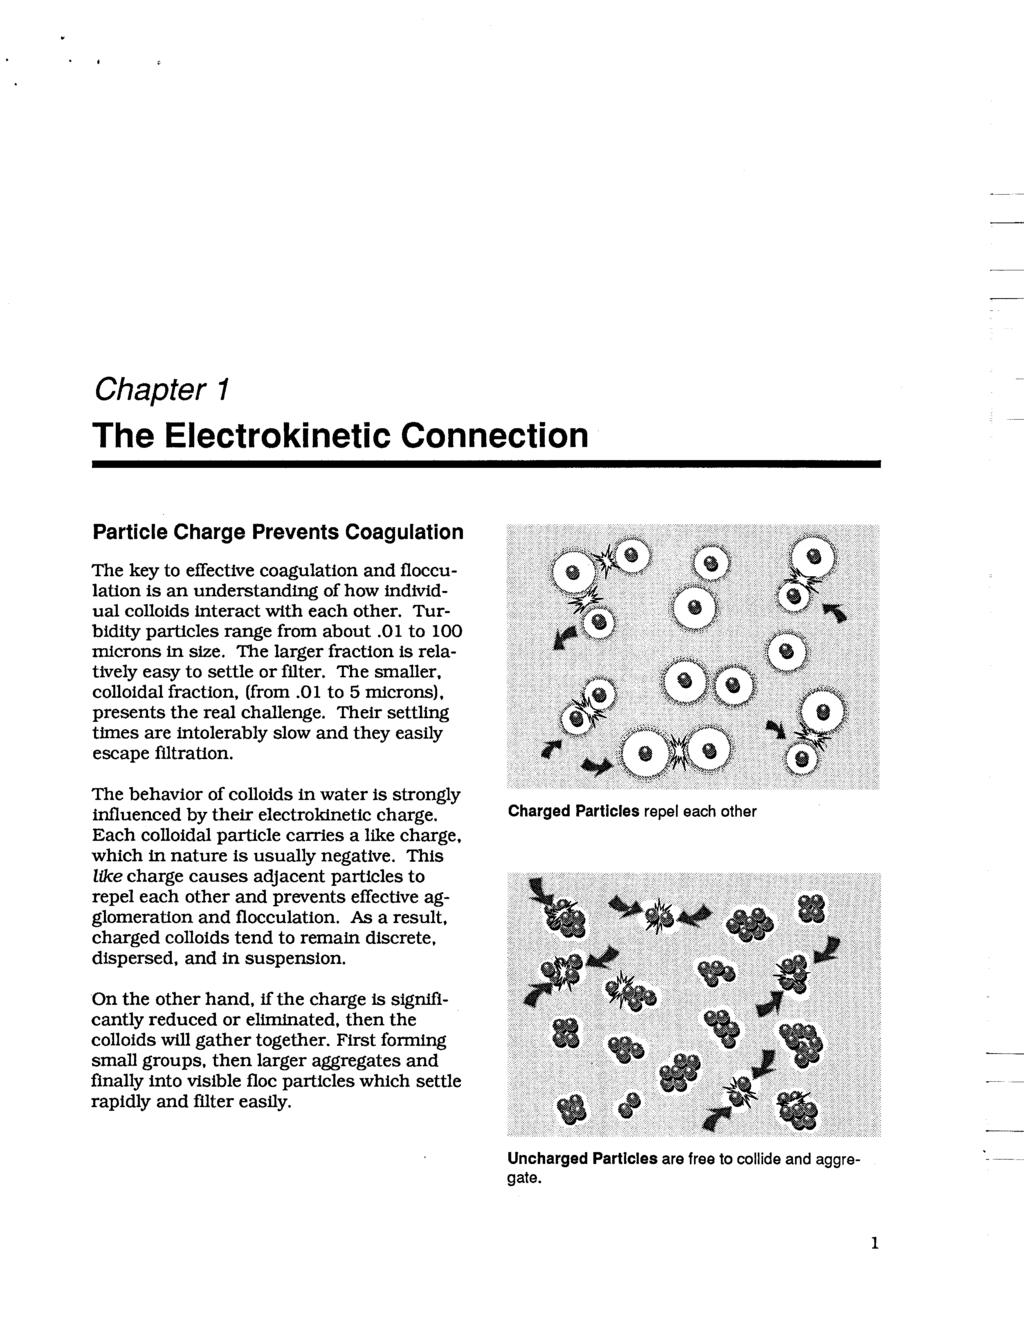 Chapter I The Electrokinetic Connection Particle Charge Prevents Coagulation The key to effective coagulation and flocculation is an understanding of how individual colloids interact with each other.